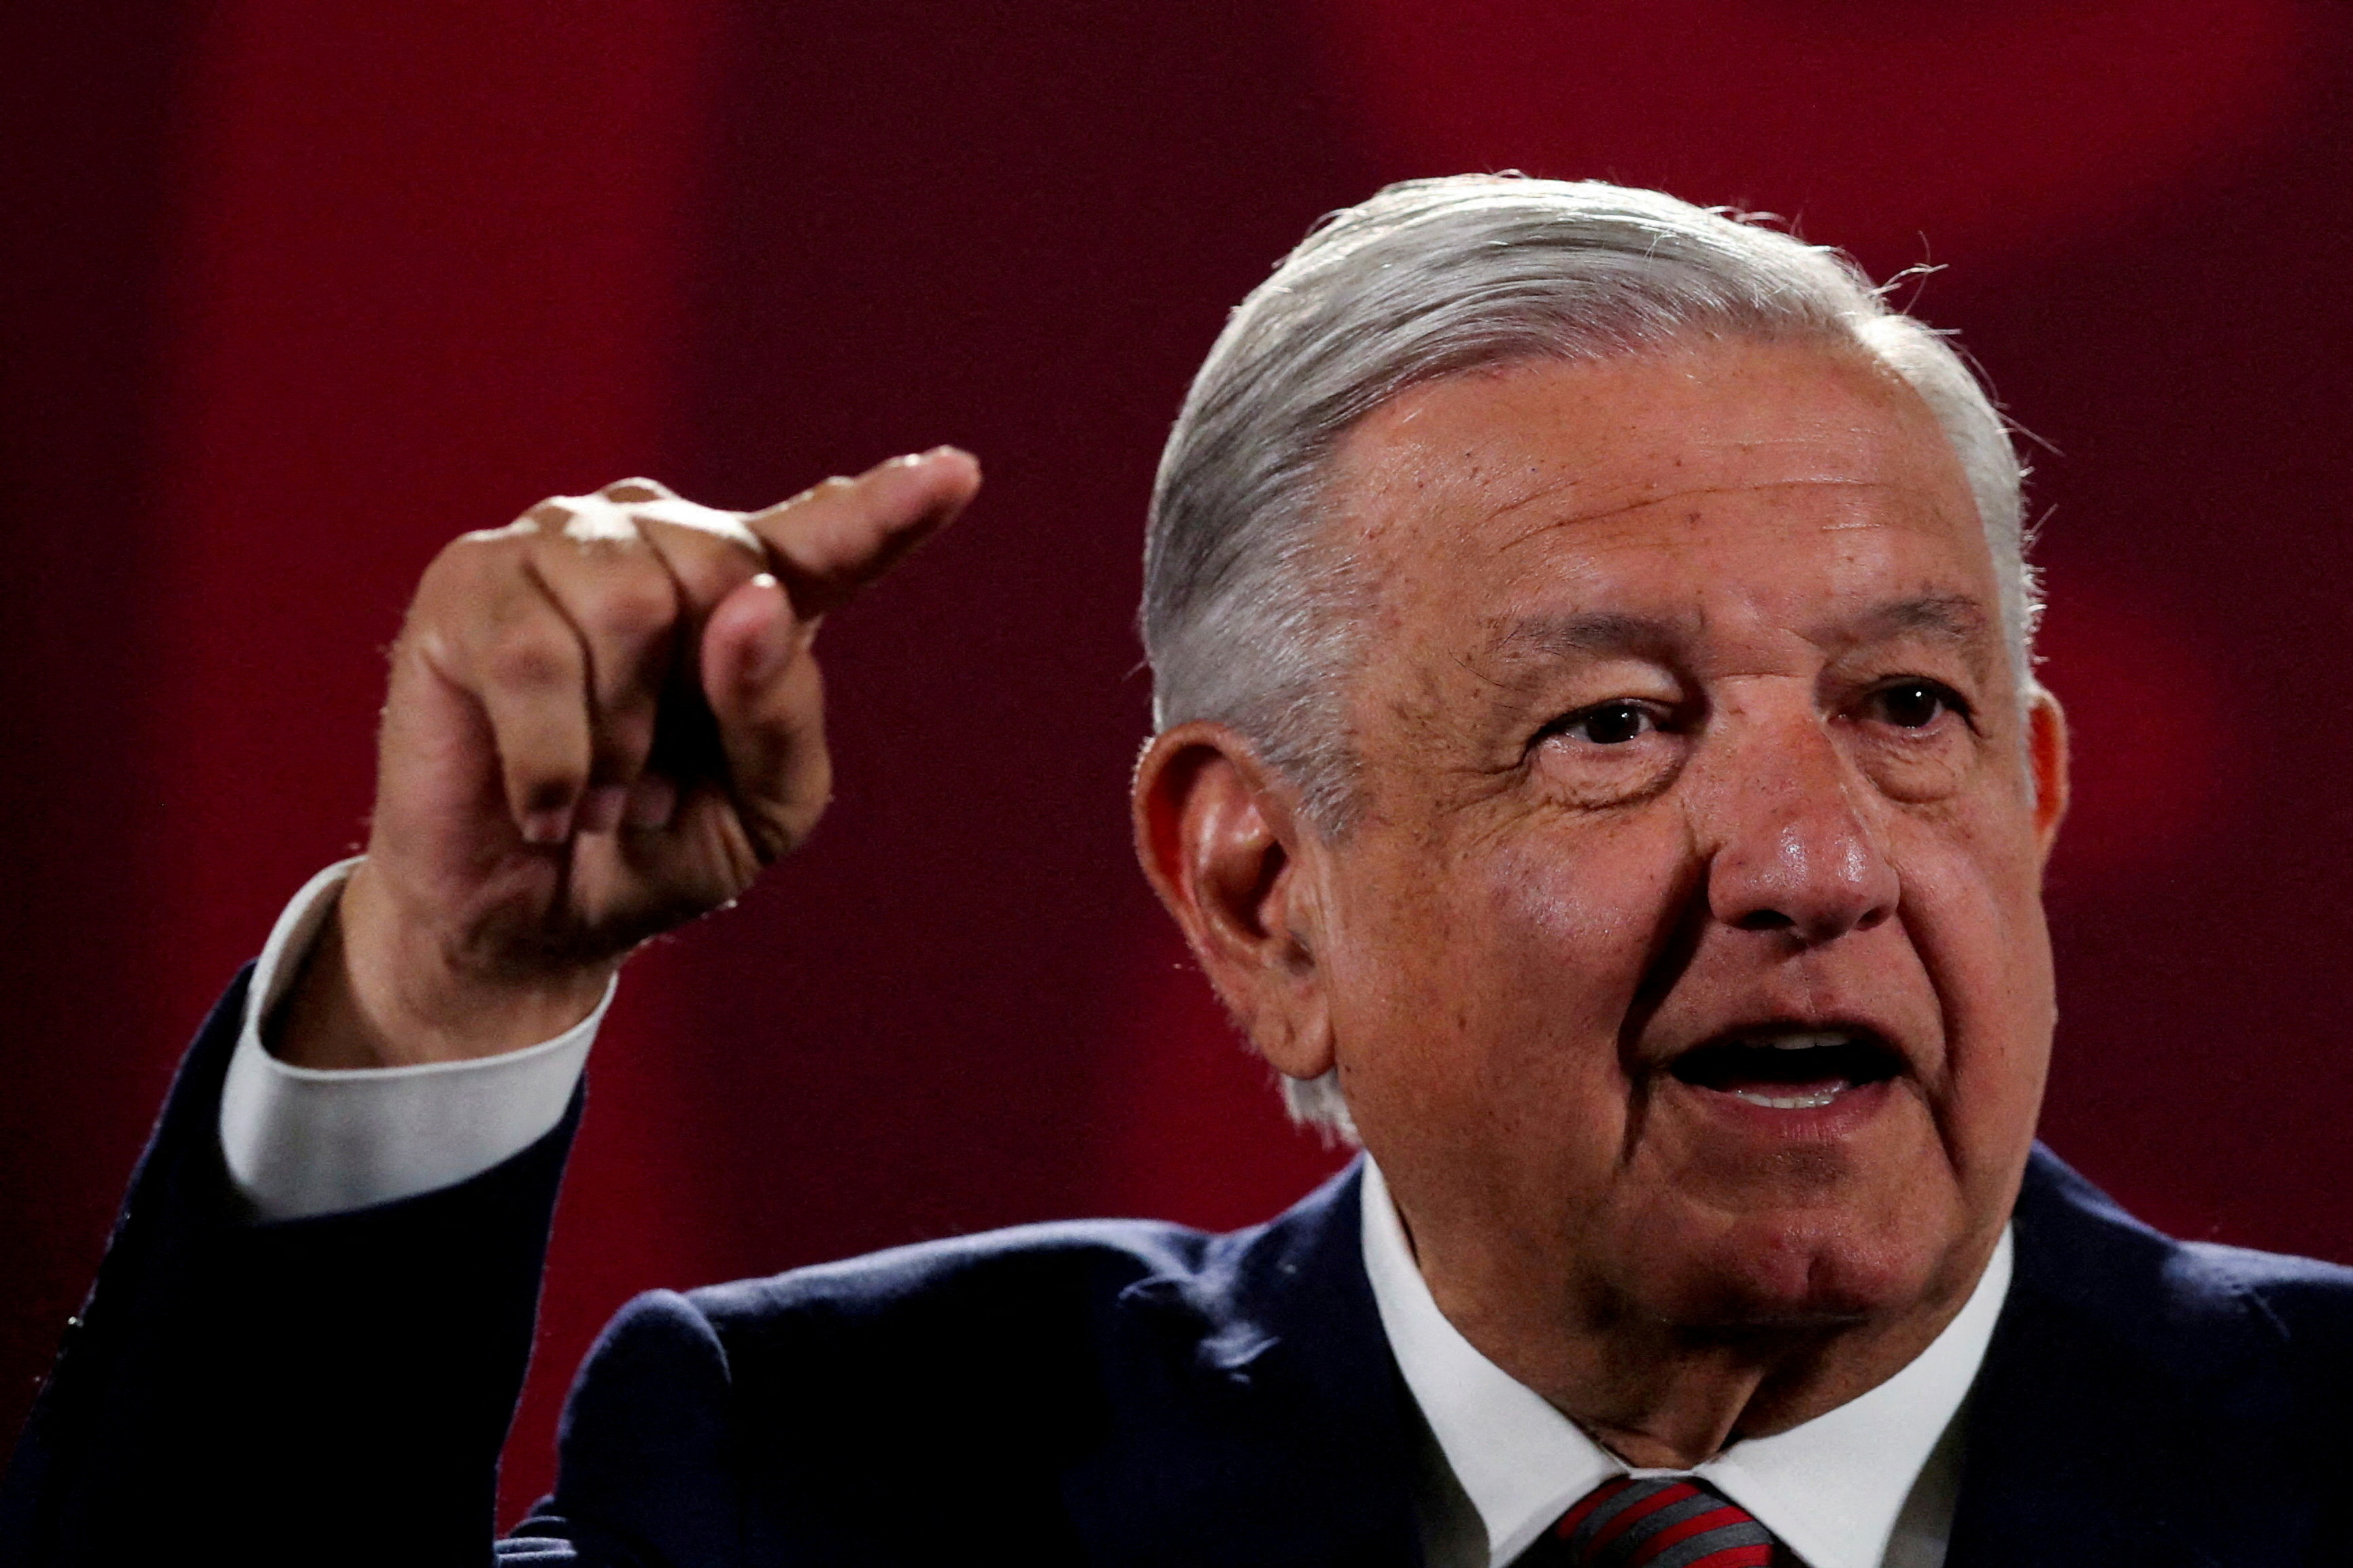 Mexico's President Lopez Obrador attends daily news conference at the National Palace